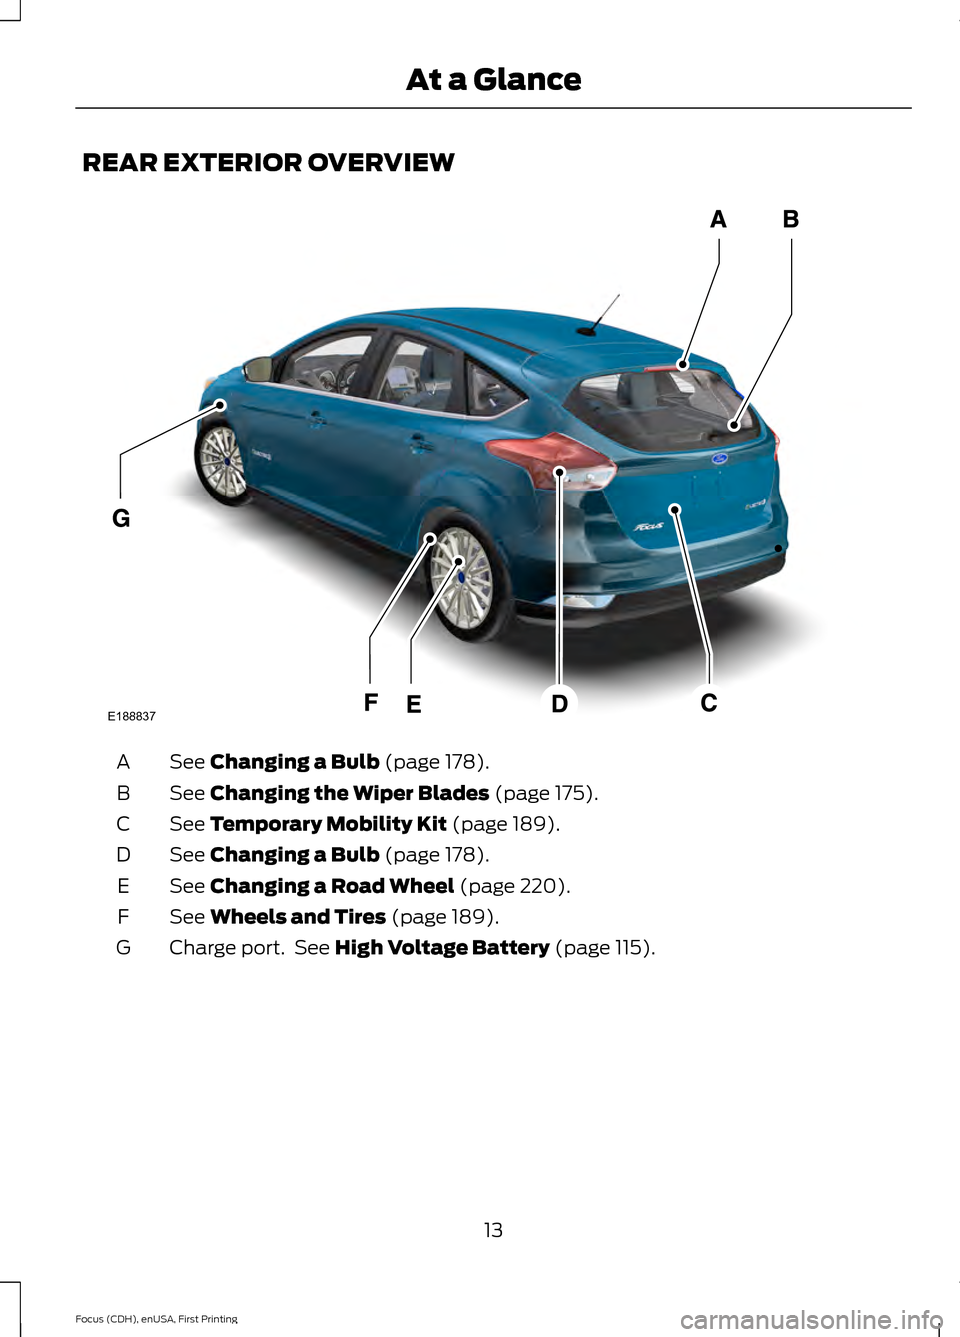 FORD FOCUS ELECTRIC 2015 3.G User Guide REAR EXTERIOR OVERVIEW
See Changing a Bulb (page 178).
A
See 
Changing the Wiper Blades (page 175).
B
See 
Temporary Mobility Kit (page 189).
C
See 
Changing a Bulb (page 178).
D
See 
Changing a Road 